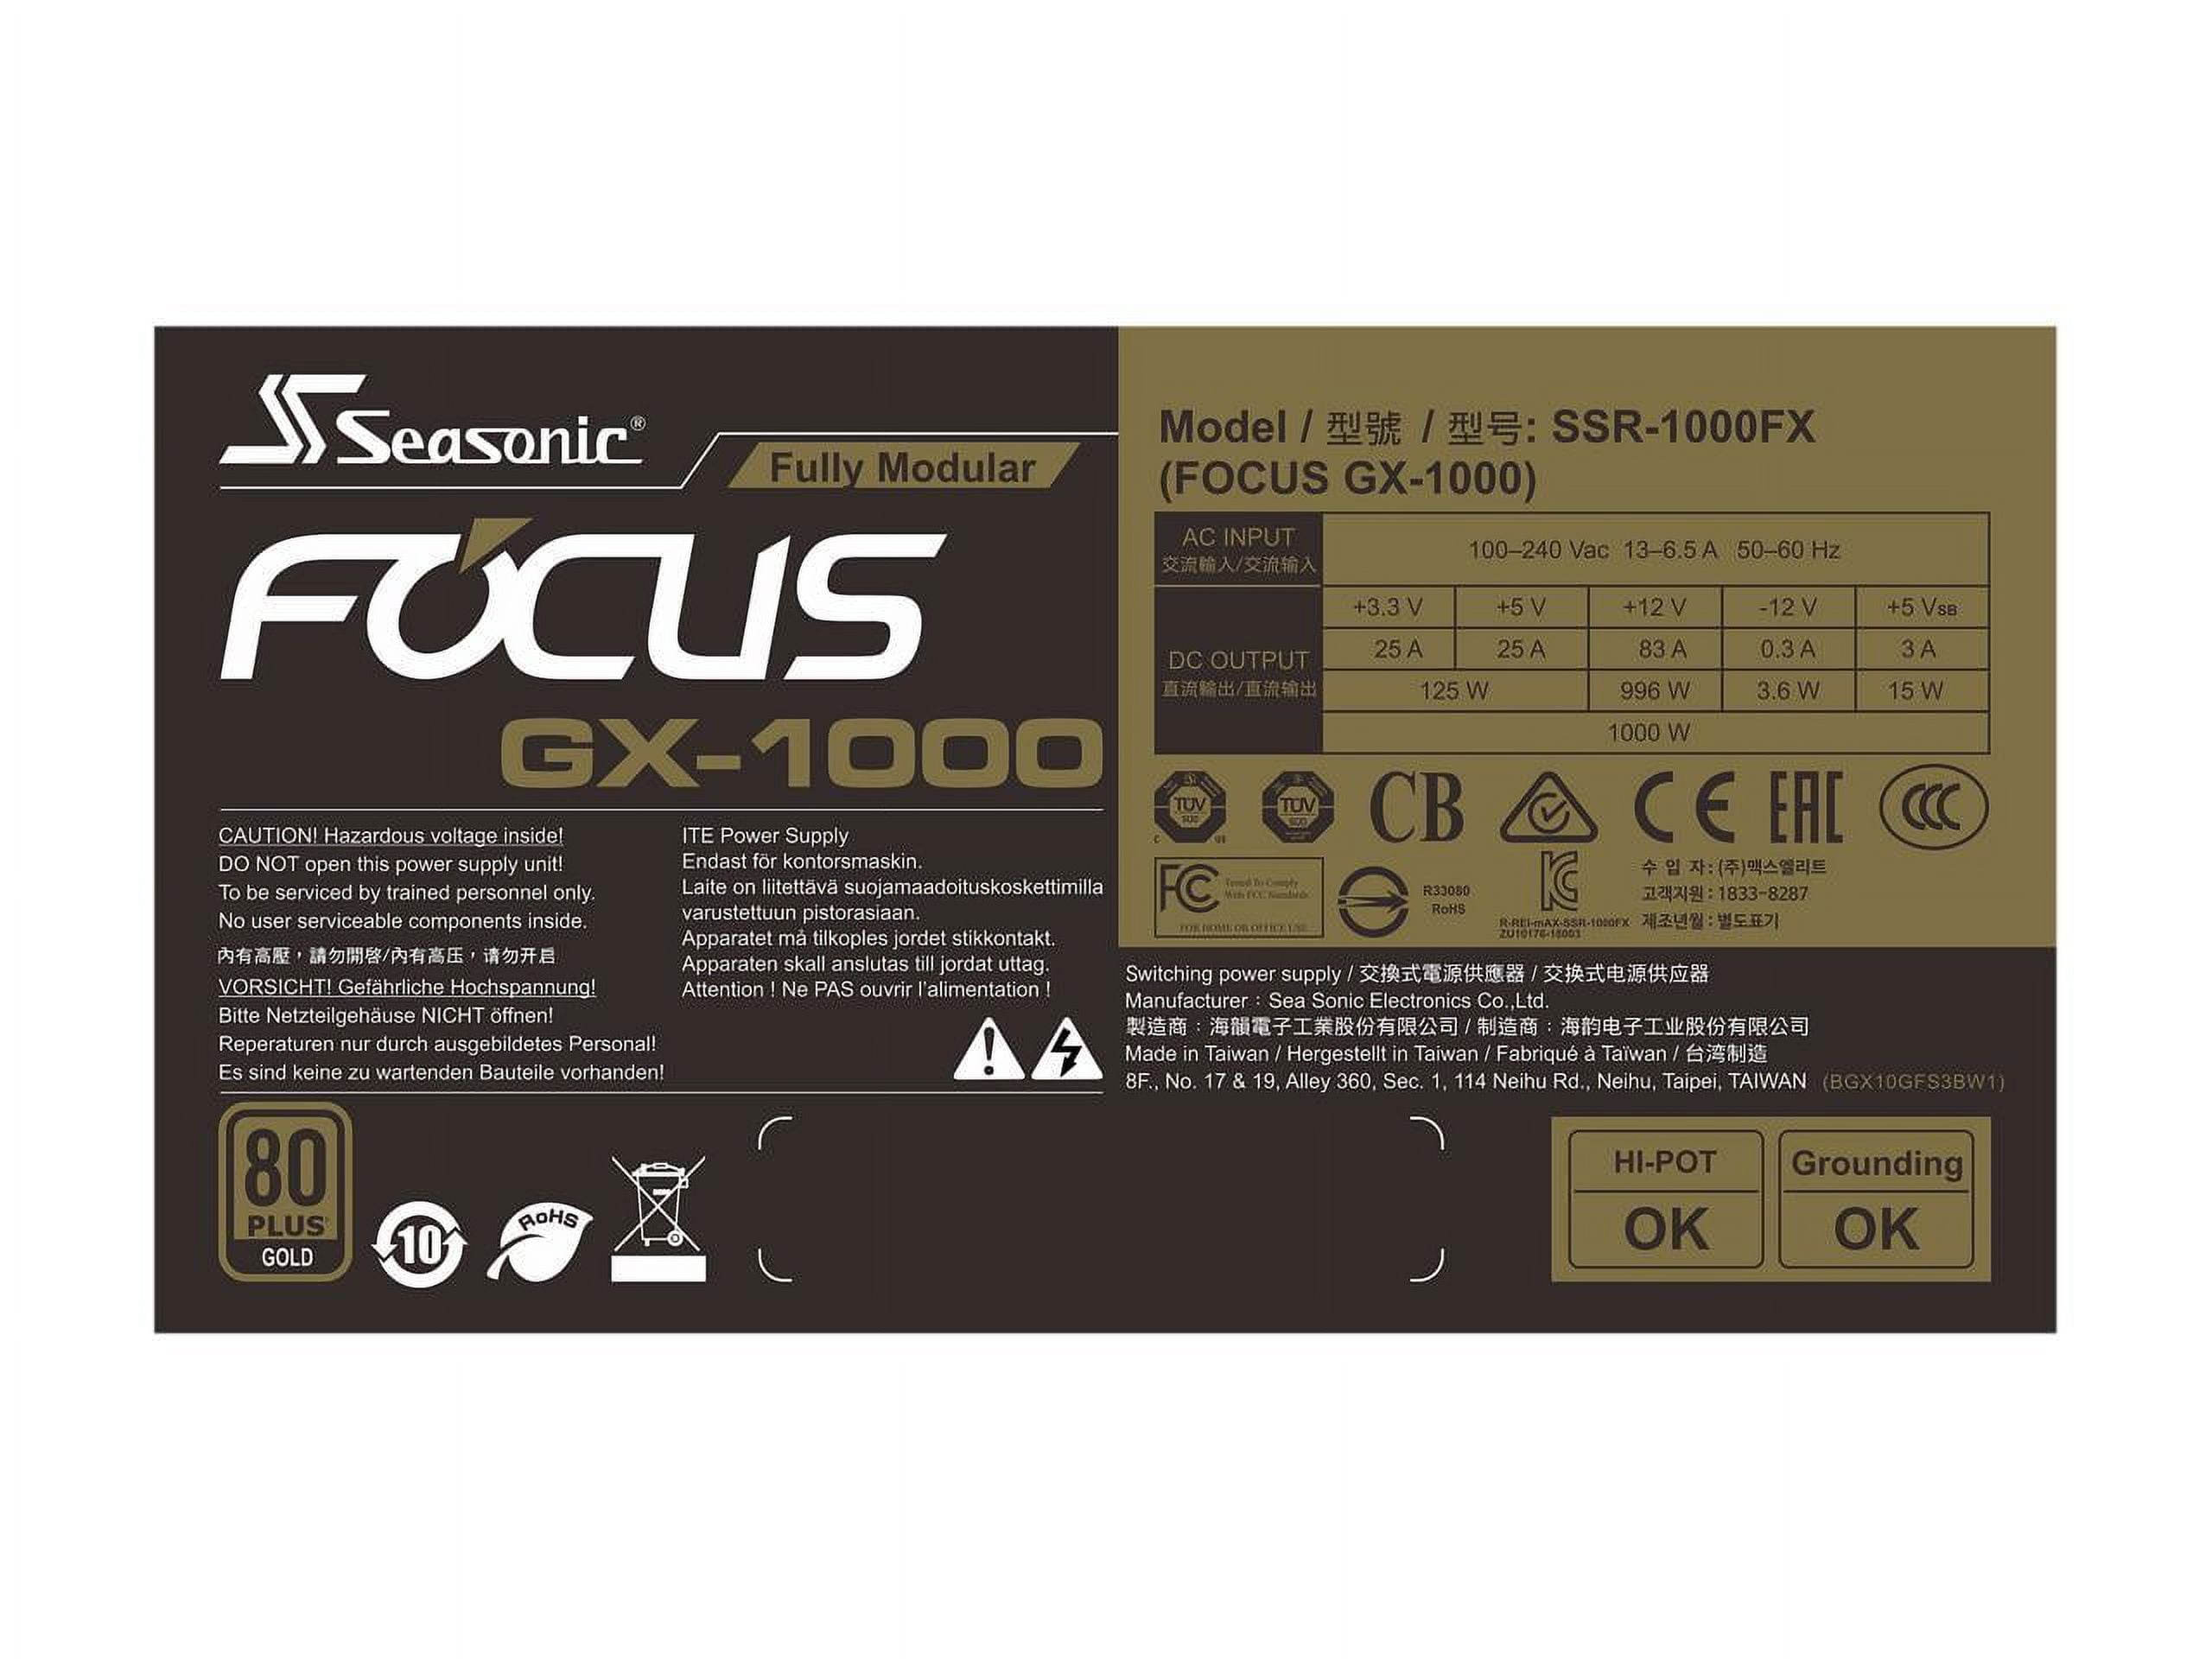 Seasonic FOCUS GX-1000 - Coolblue - Before 23:59, delivered tomorrow